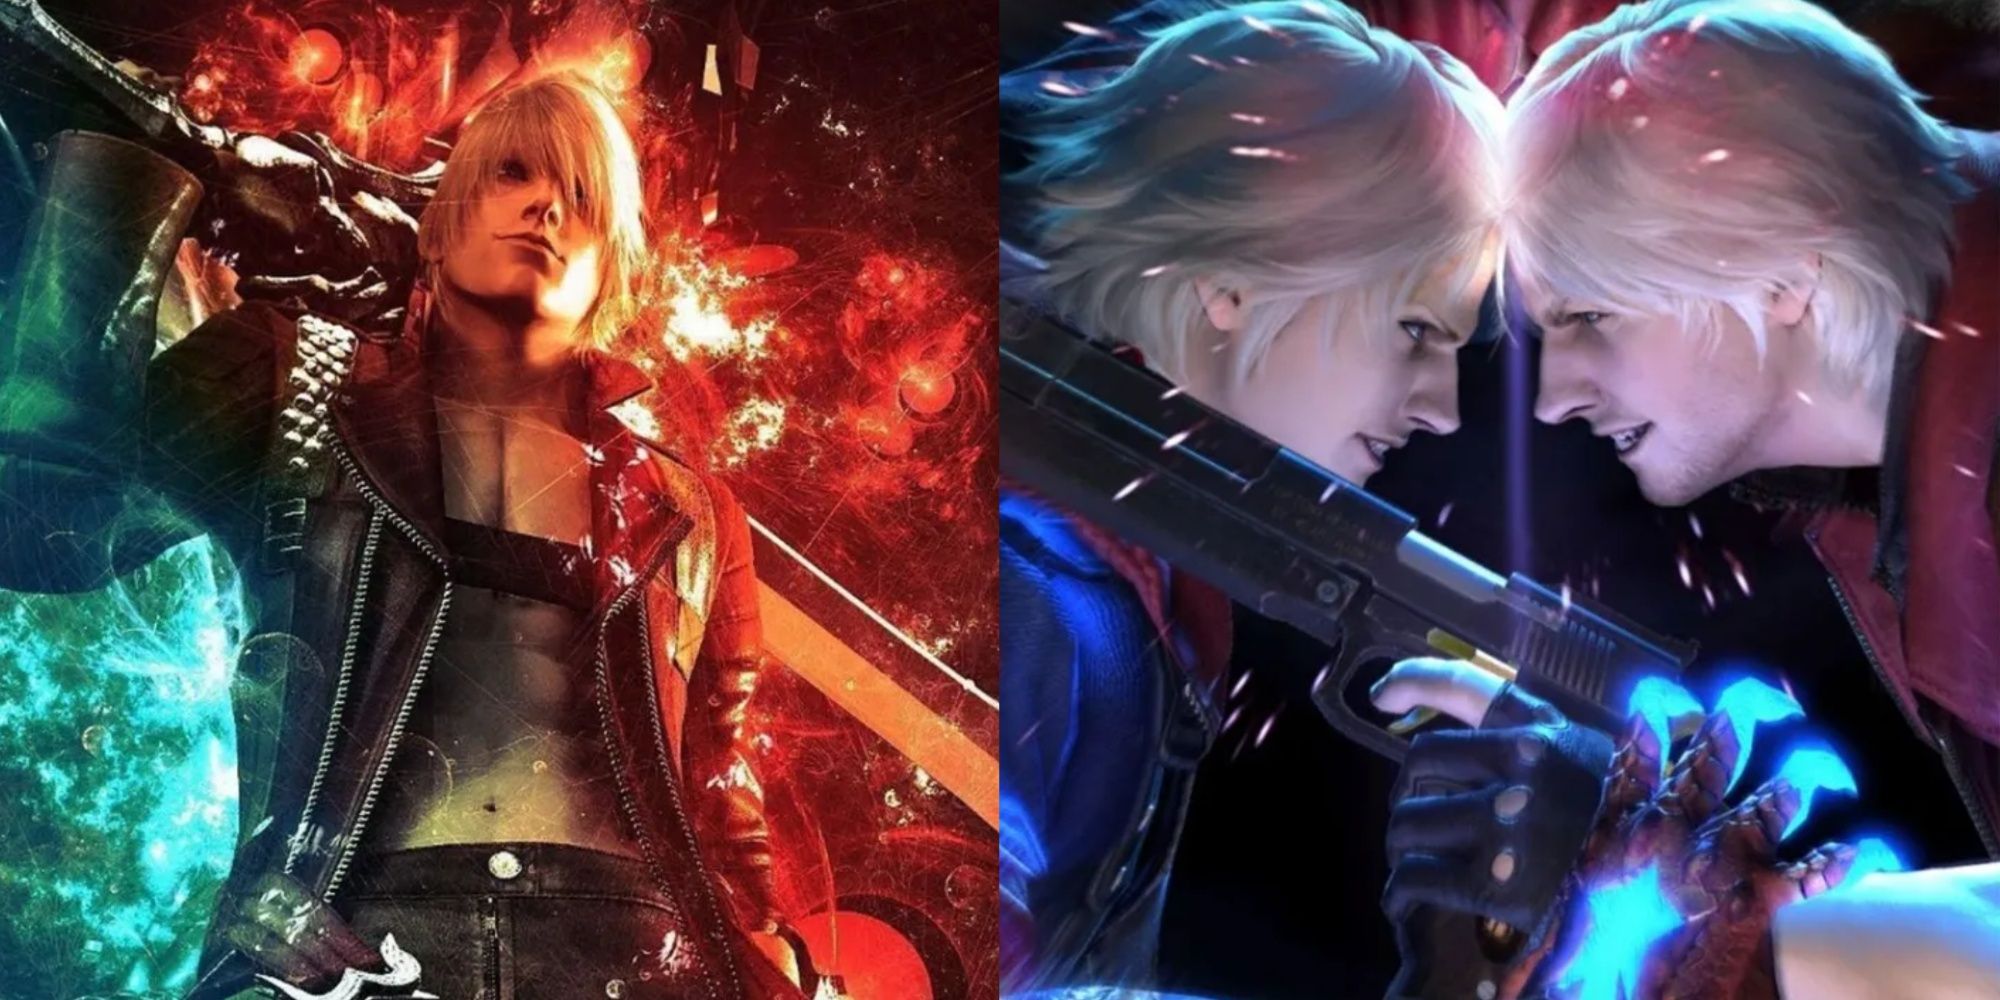 Devil May 3 and Devil May Cry 4